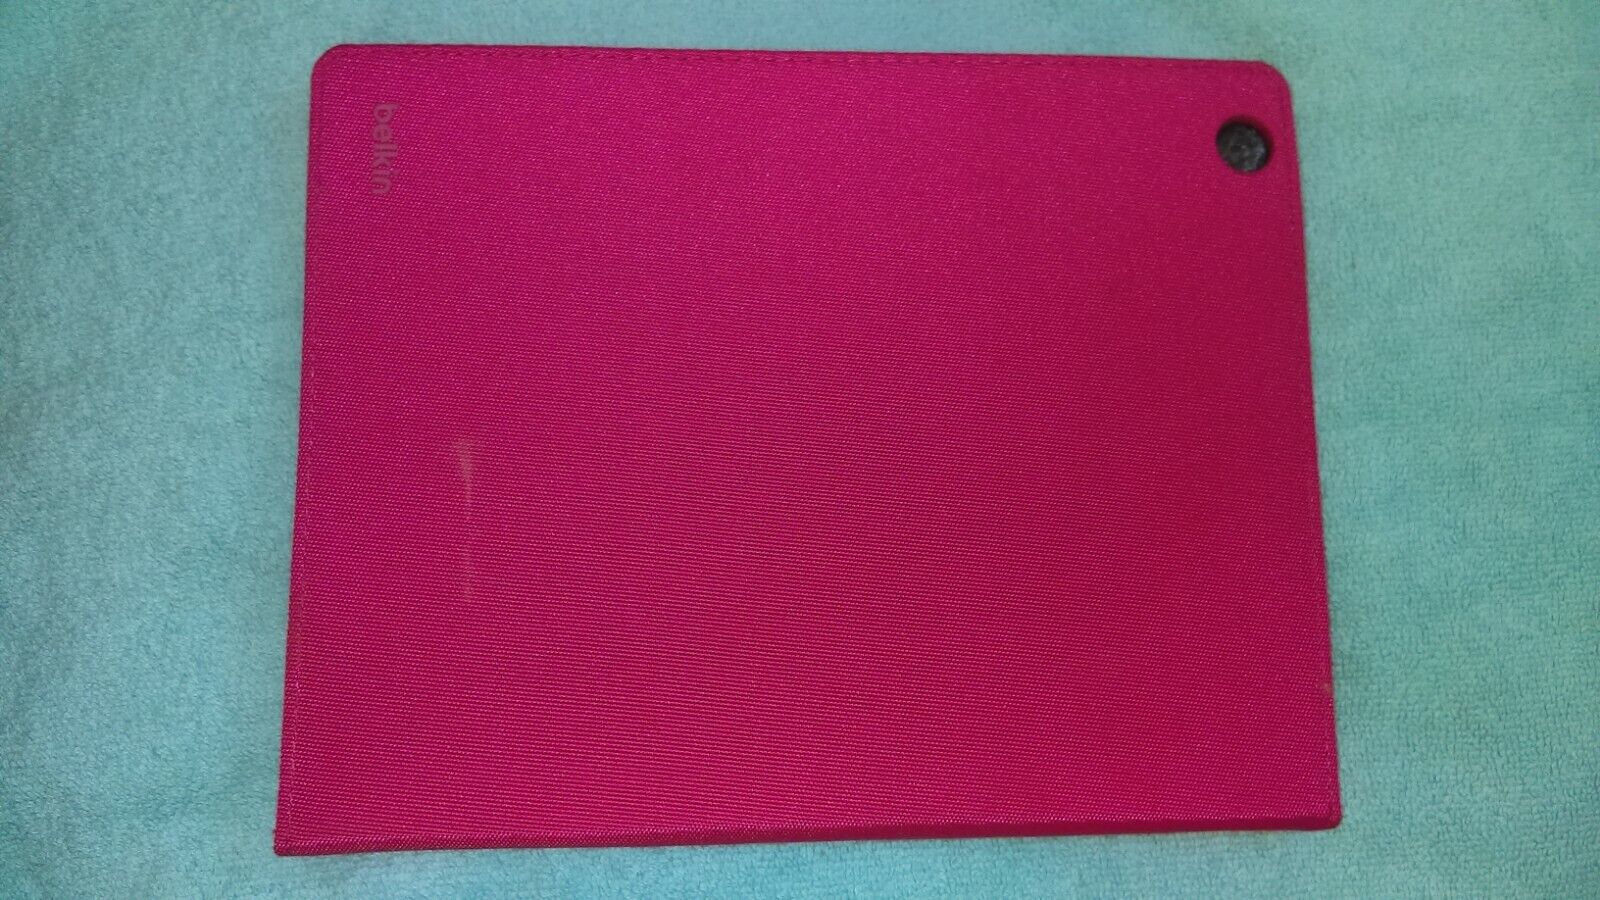 Belkin iPad 2/3/4 Case - Pink Protective case cover stand